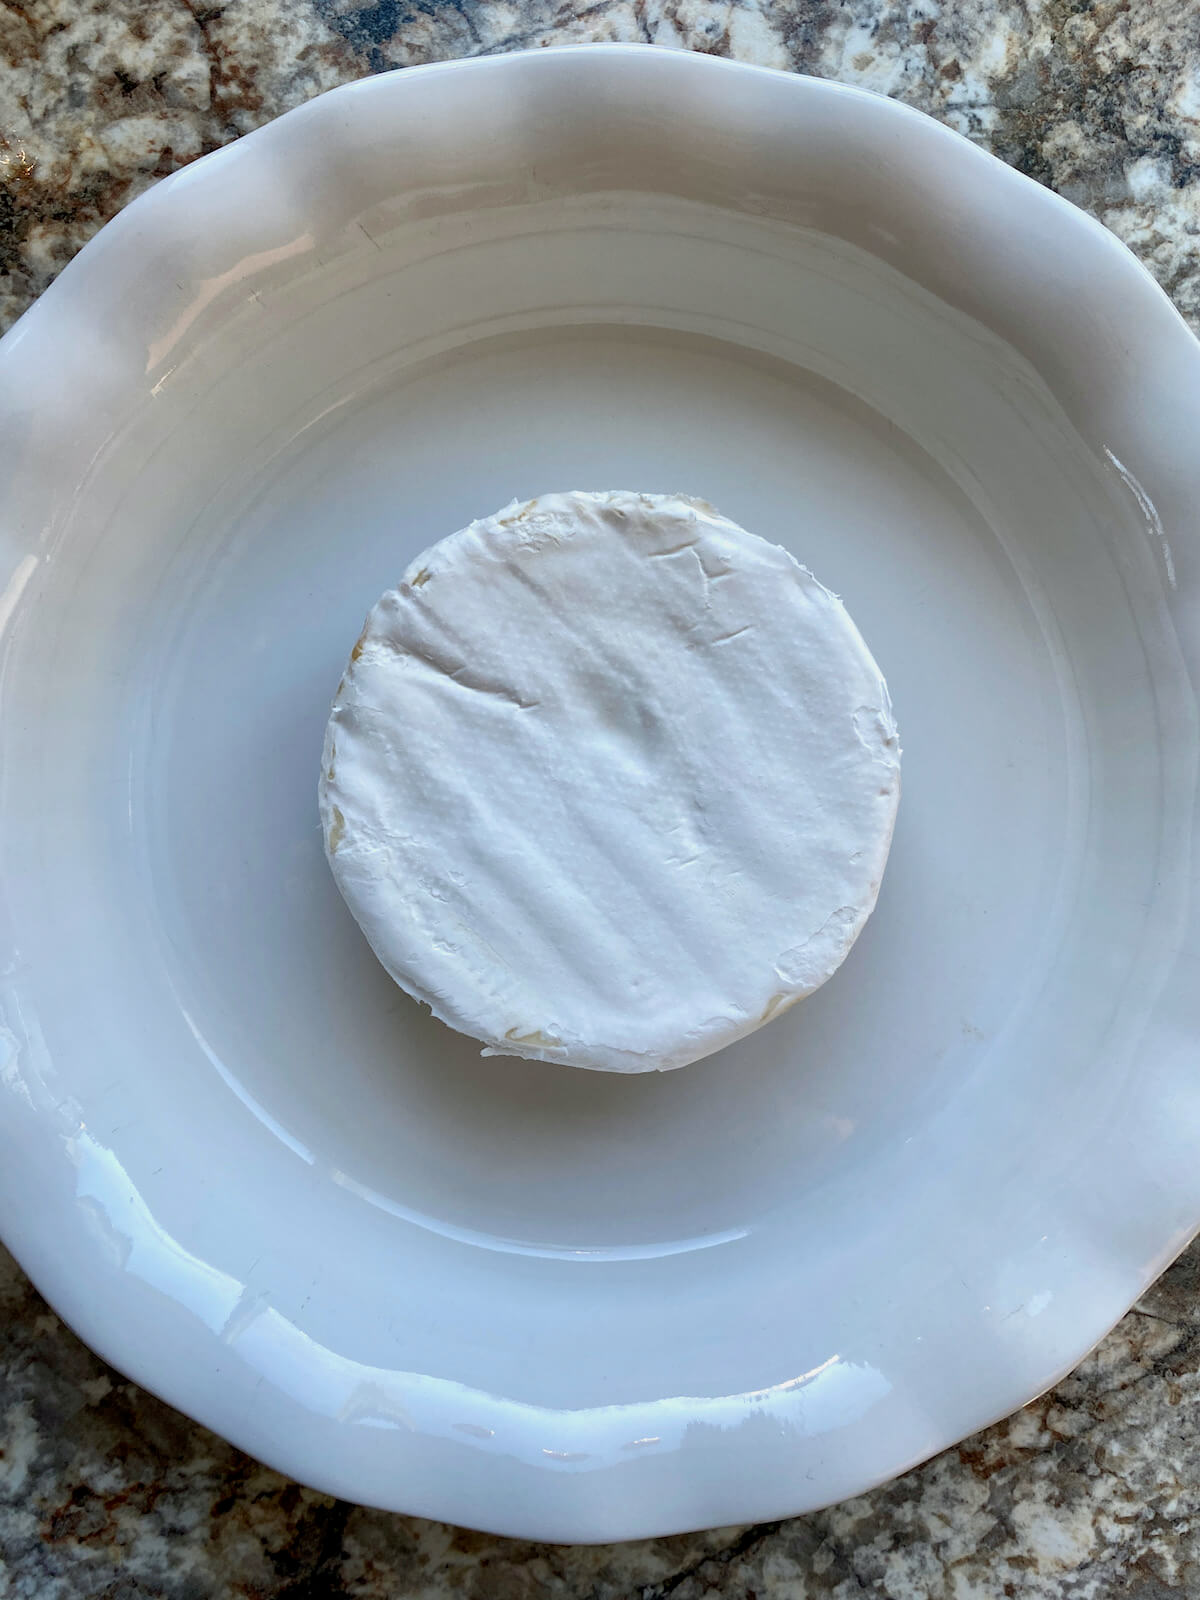 A wheel of Brie cheese in a white pie plate.